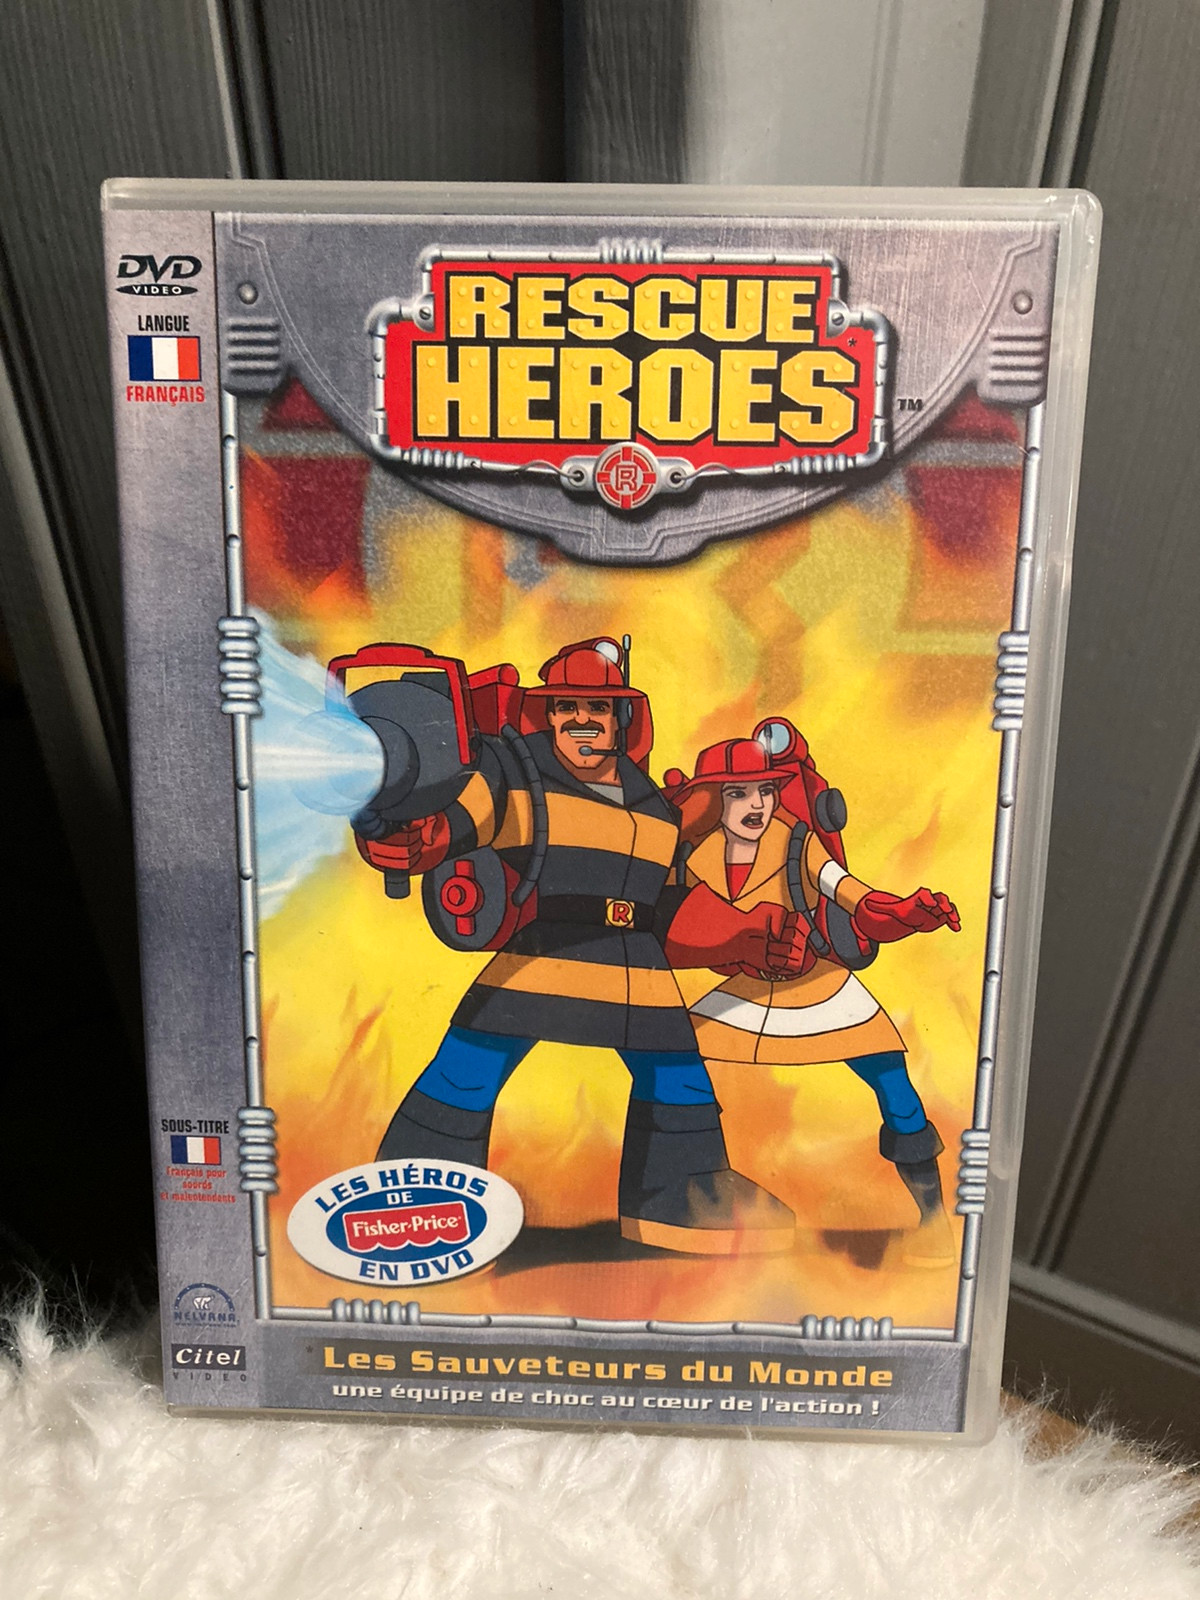 This Old Toy's Fisher-Price Rescue Heroes Equipment Pack Identification